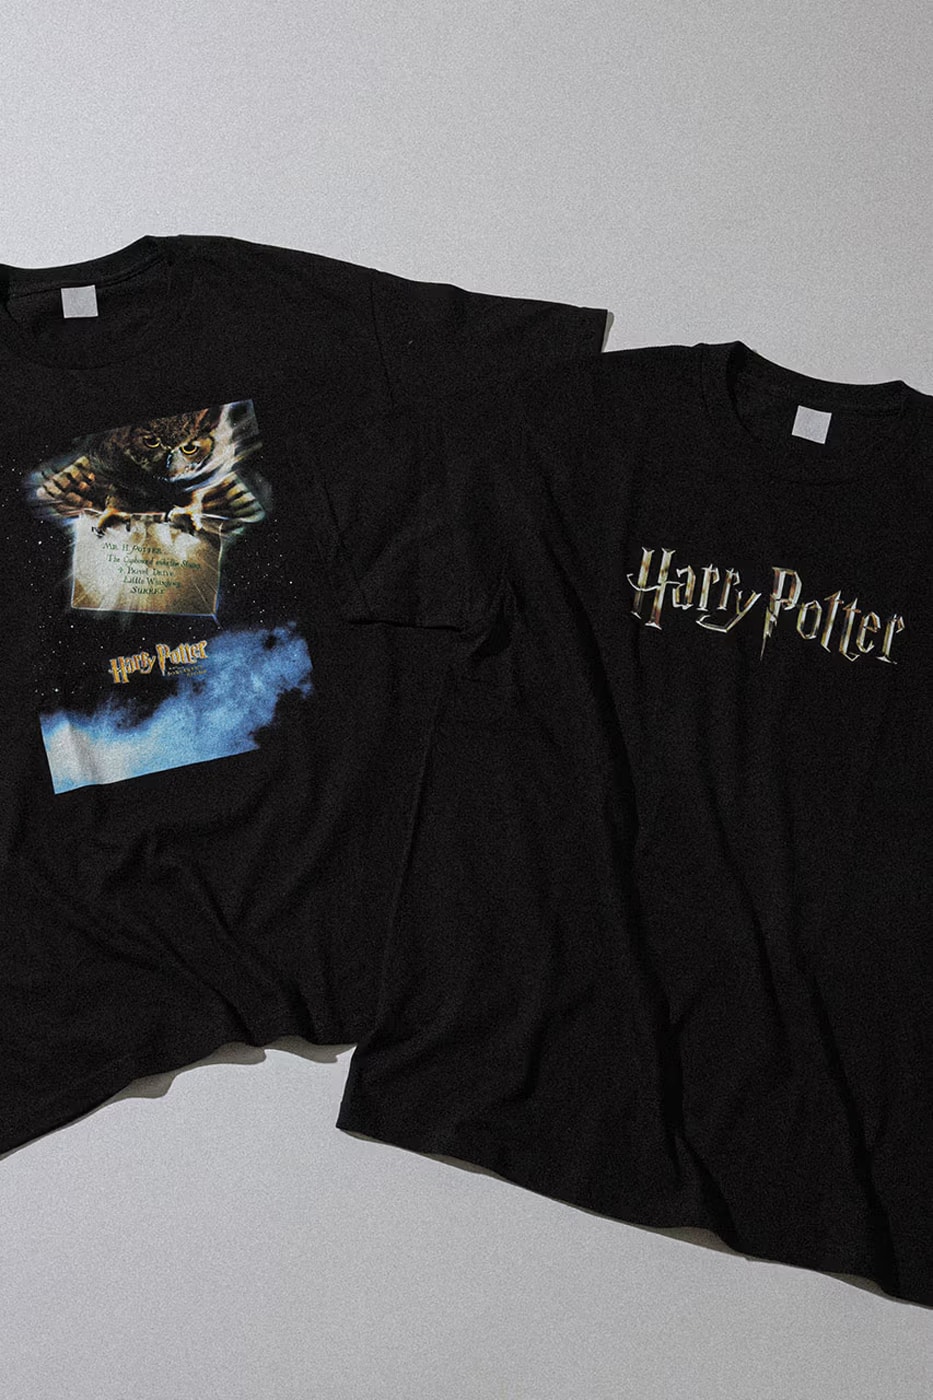 JOURNAL STANDARD Releases Nostalgic 'Harry Potter' Capsule t-shirt series graphcics harry potter and the philosopher stone order of the phoenix goblet of fire prizoner of azkaban chamber of secrets deathly hallows warner bros daniel radcliffe rupert grint hermione granger emma watson hedwig hogwarts doby